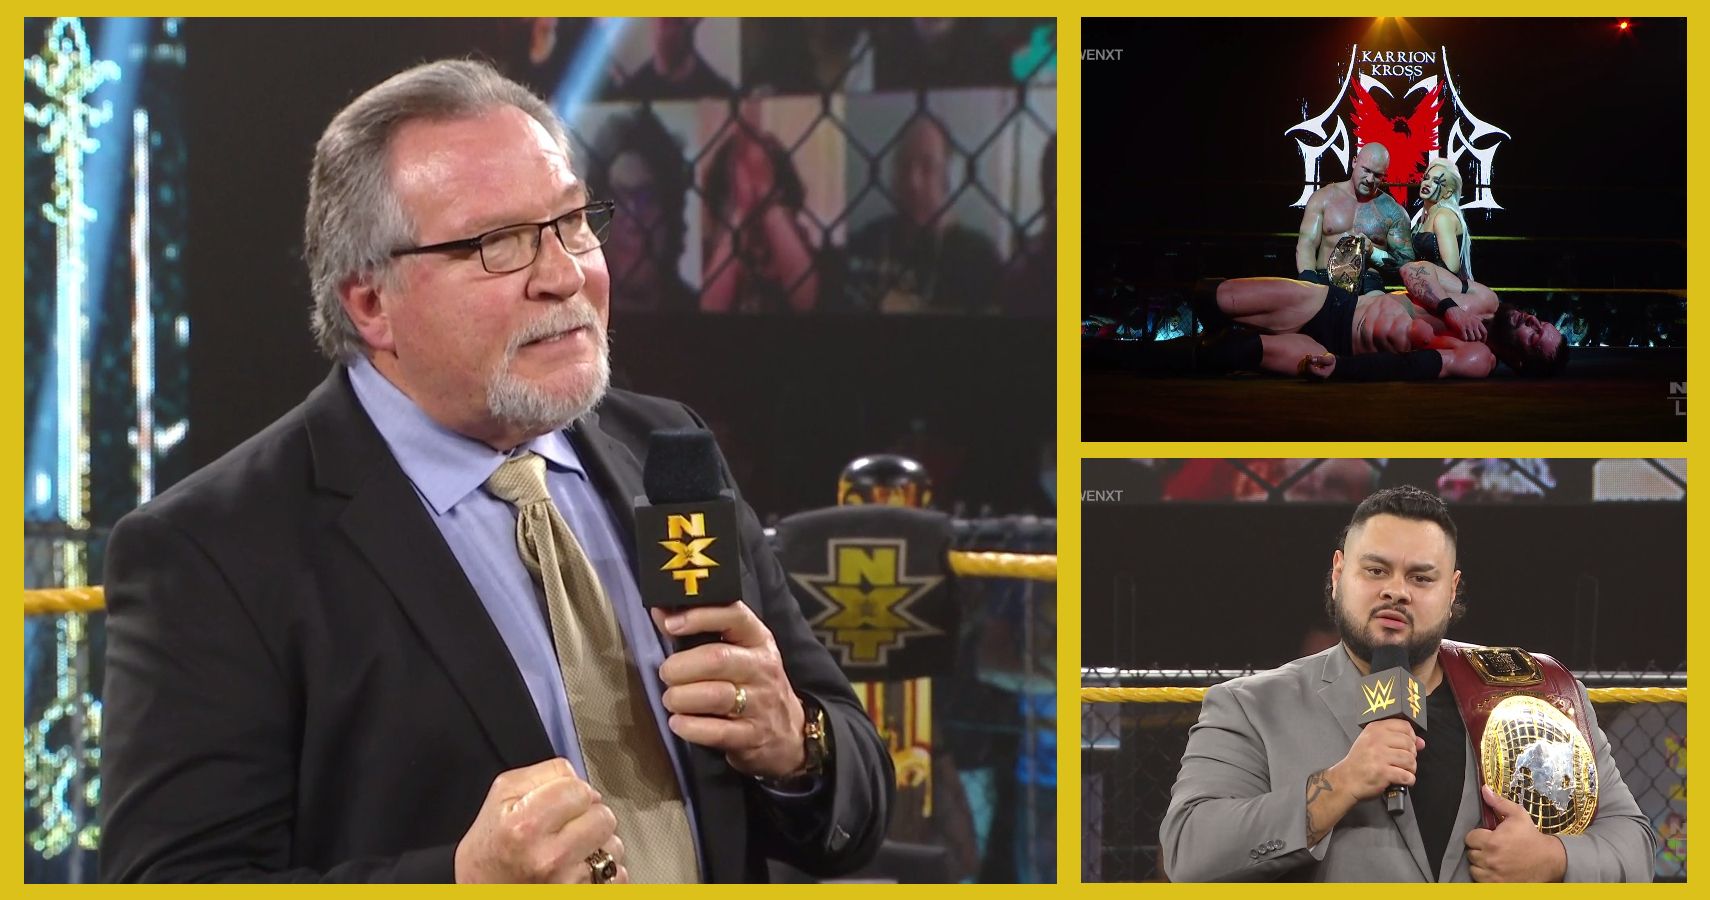 The Million Dollar Man Ted DiBiase, NXT Champion Karrion Kross, and Bronson Reed on NXT 5/25/2021